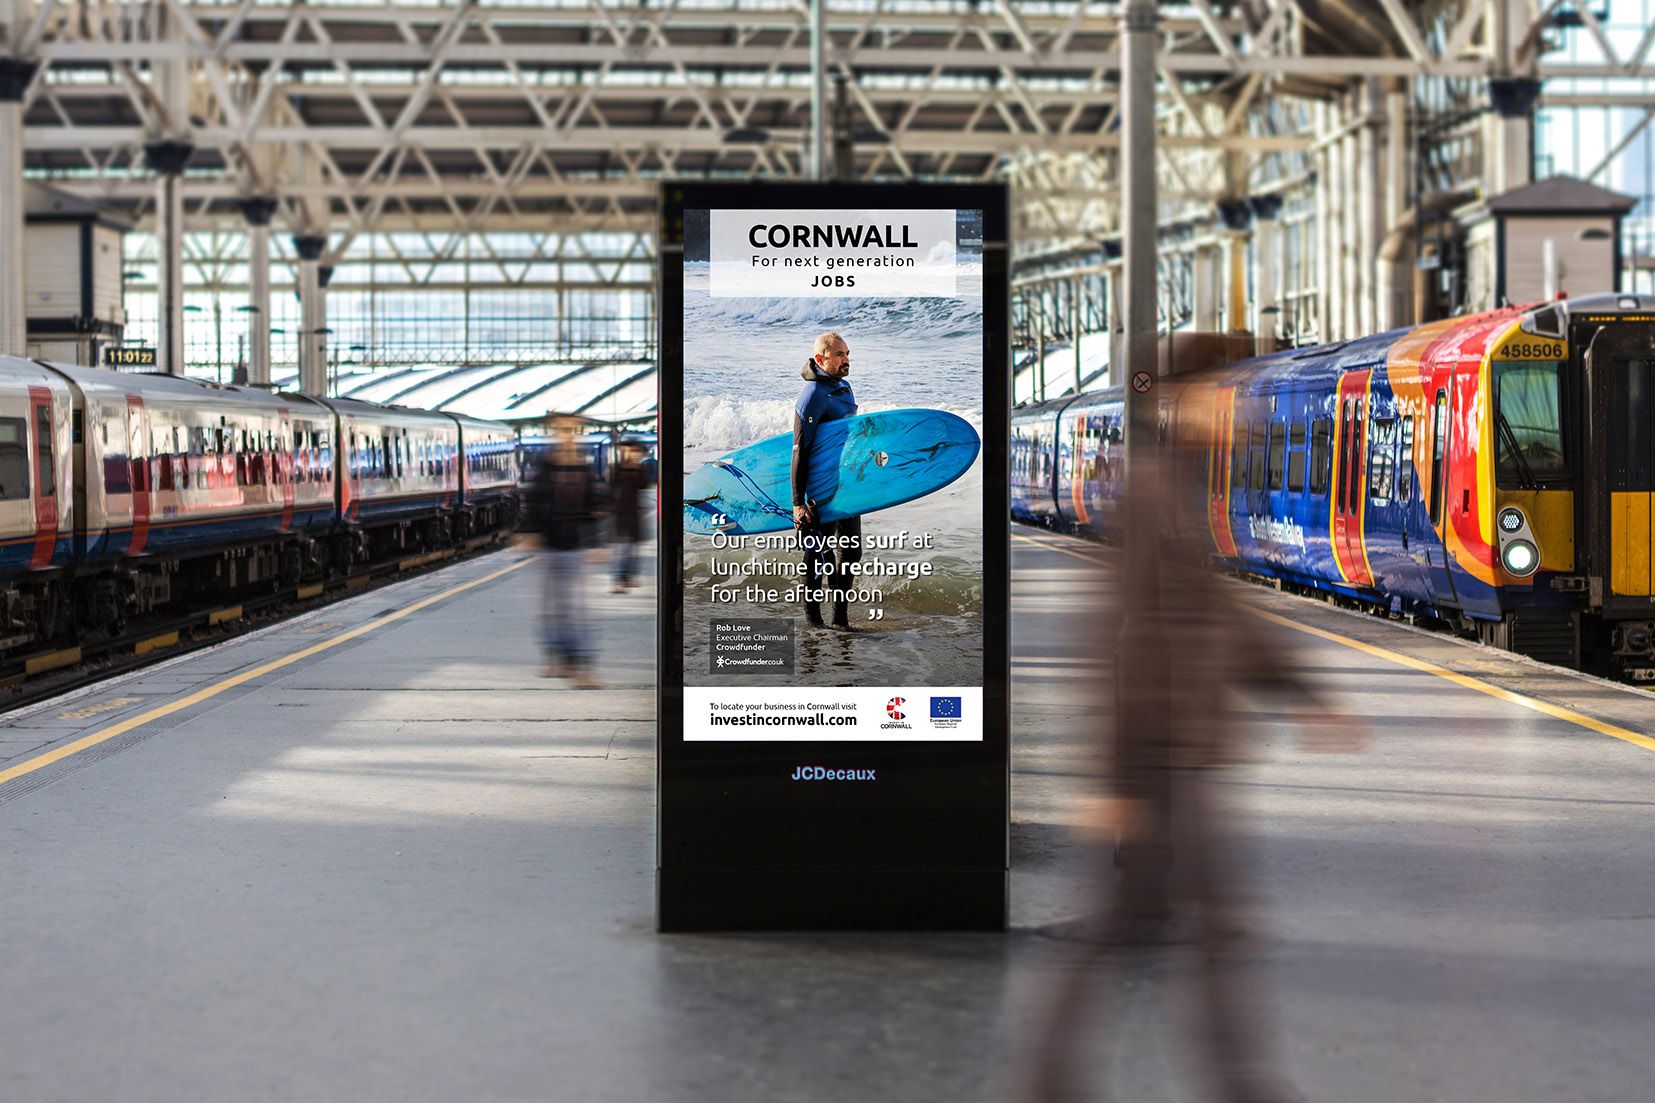 A JC Decaux digital billboard at a busy London station with a portrait of Rob Love holding a surfboard on it